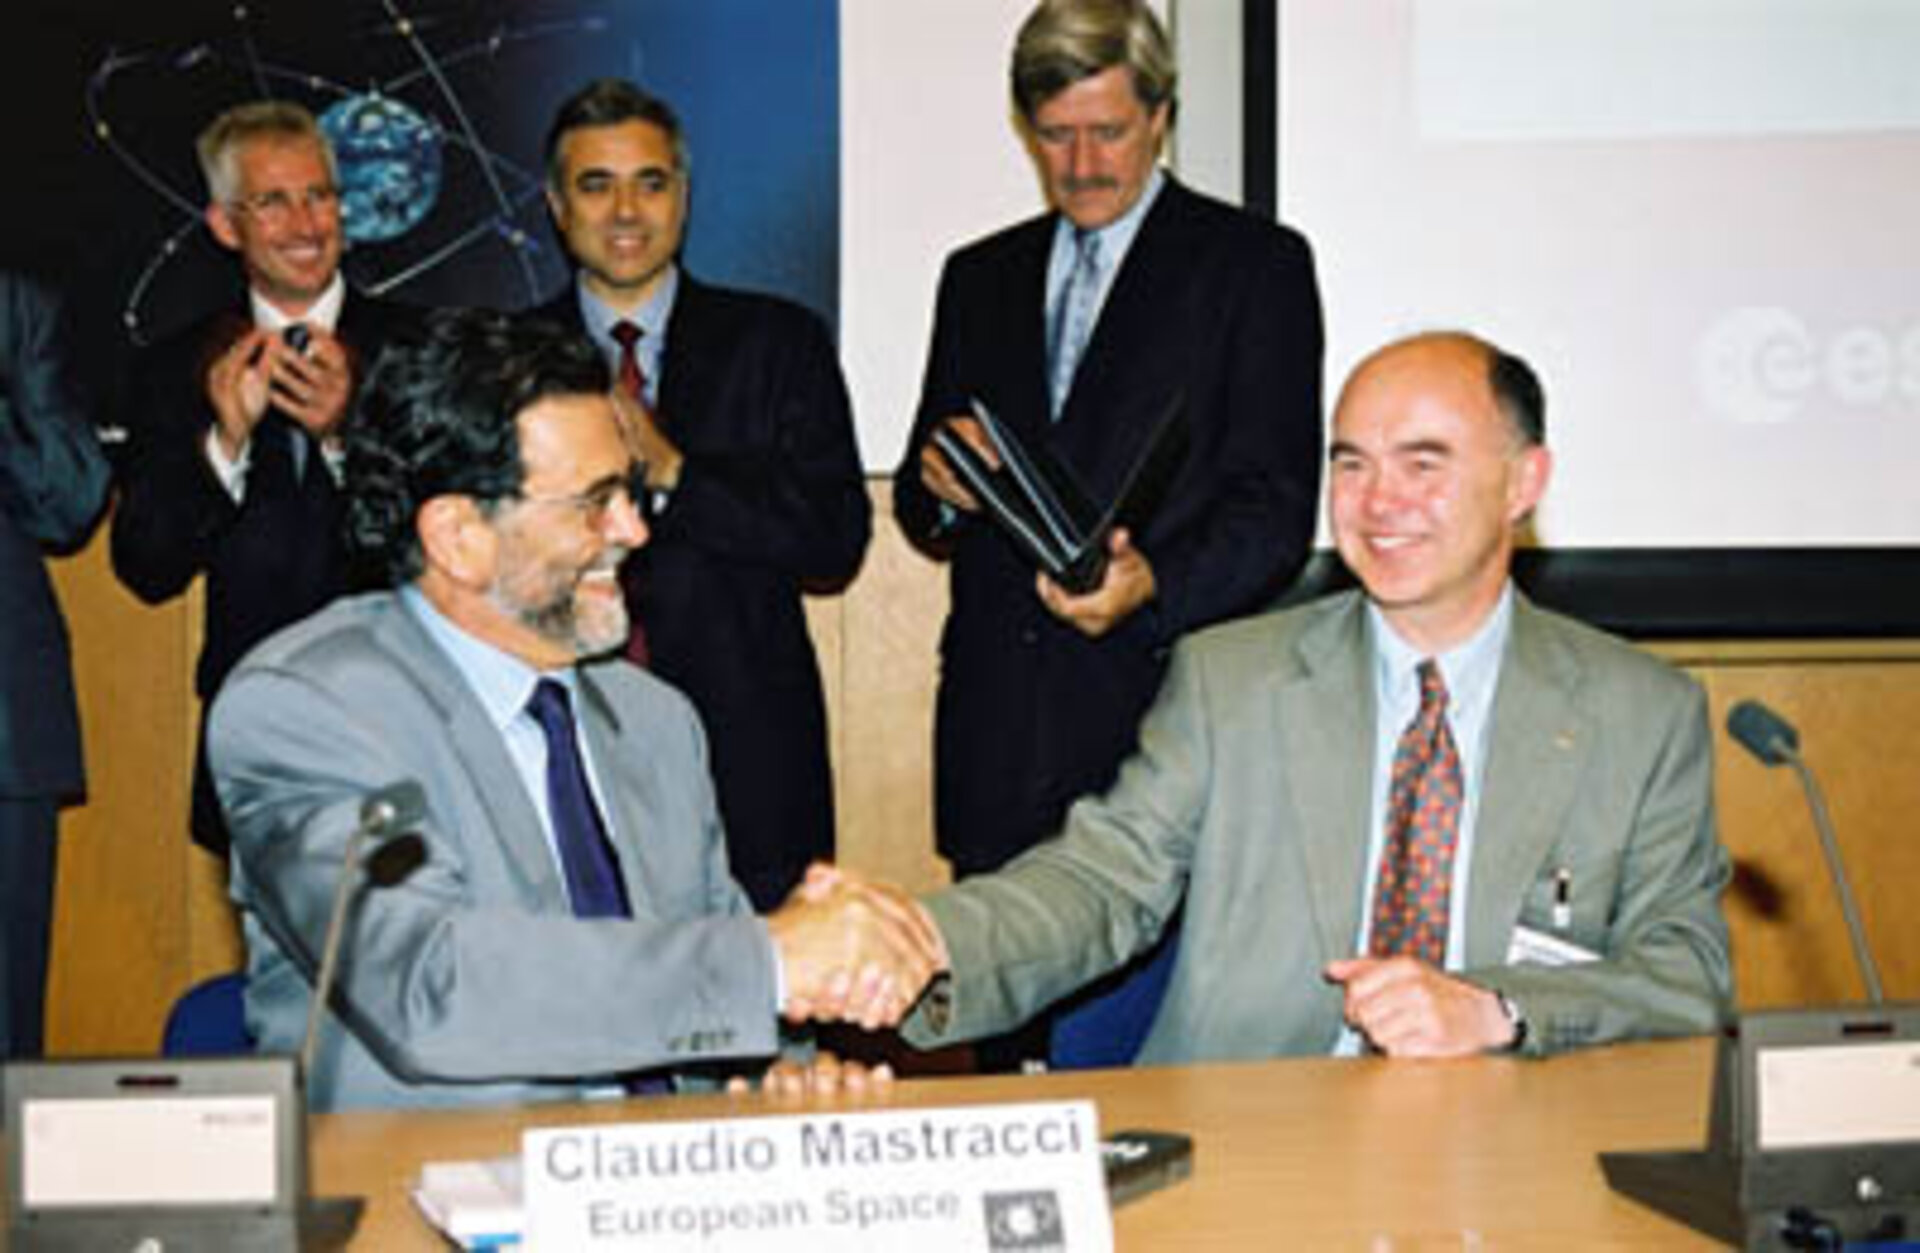 Mr. Mastracci and Prof. Sir Martin Sweeting signed one of the first contracts for Galileo today